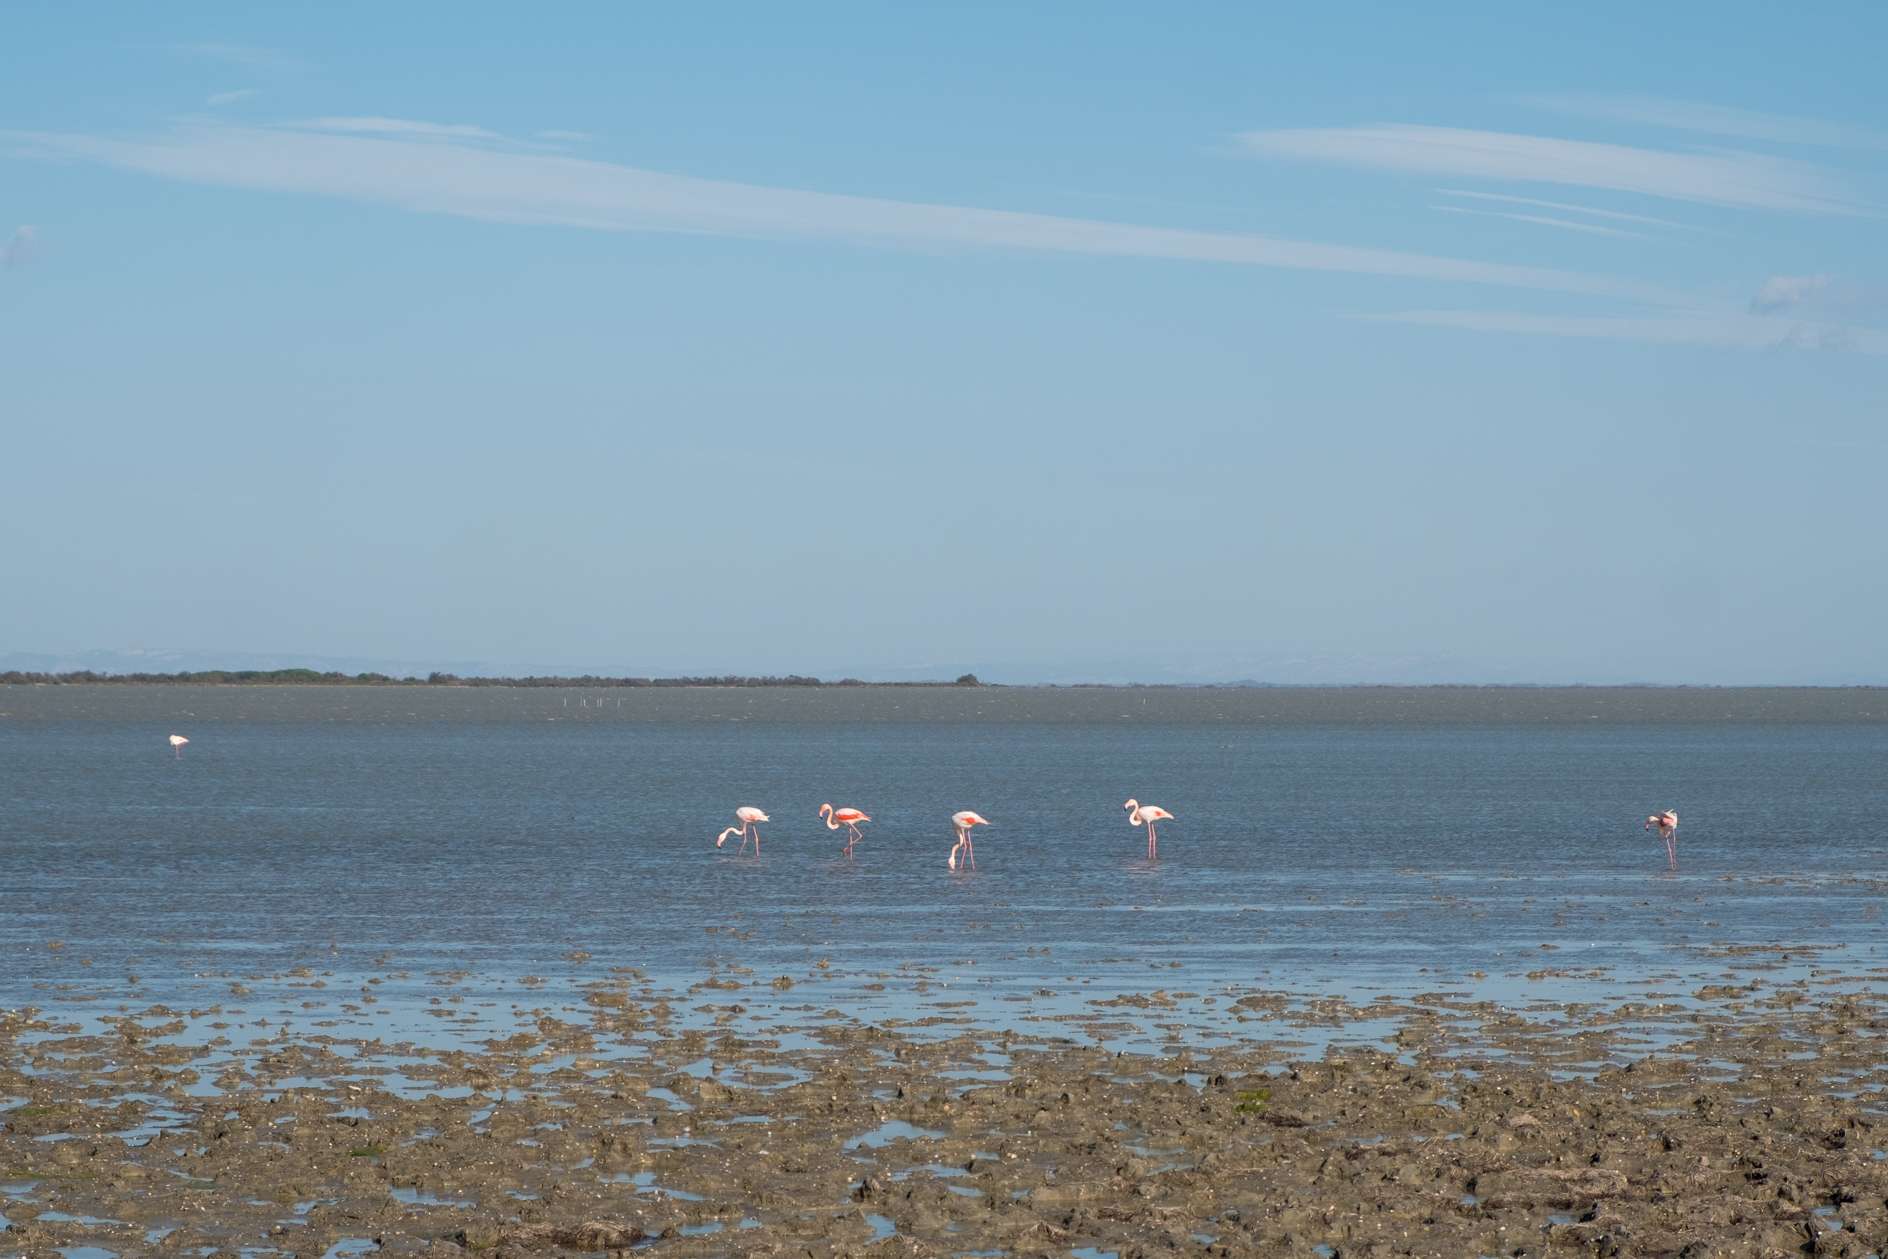 Flamingoes in the Camargue